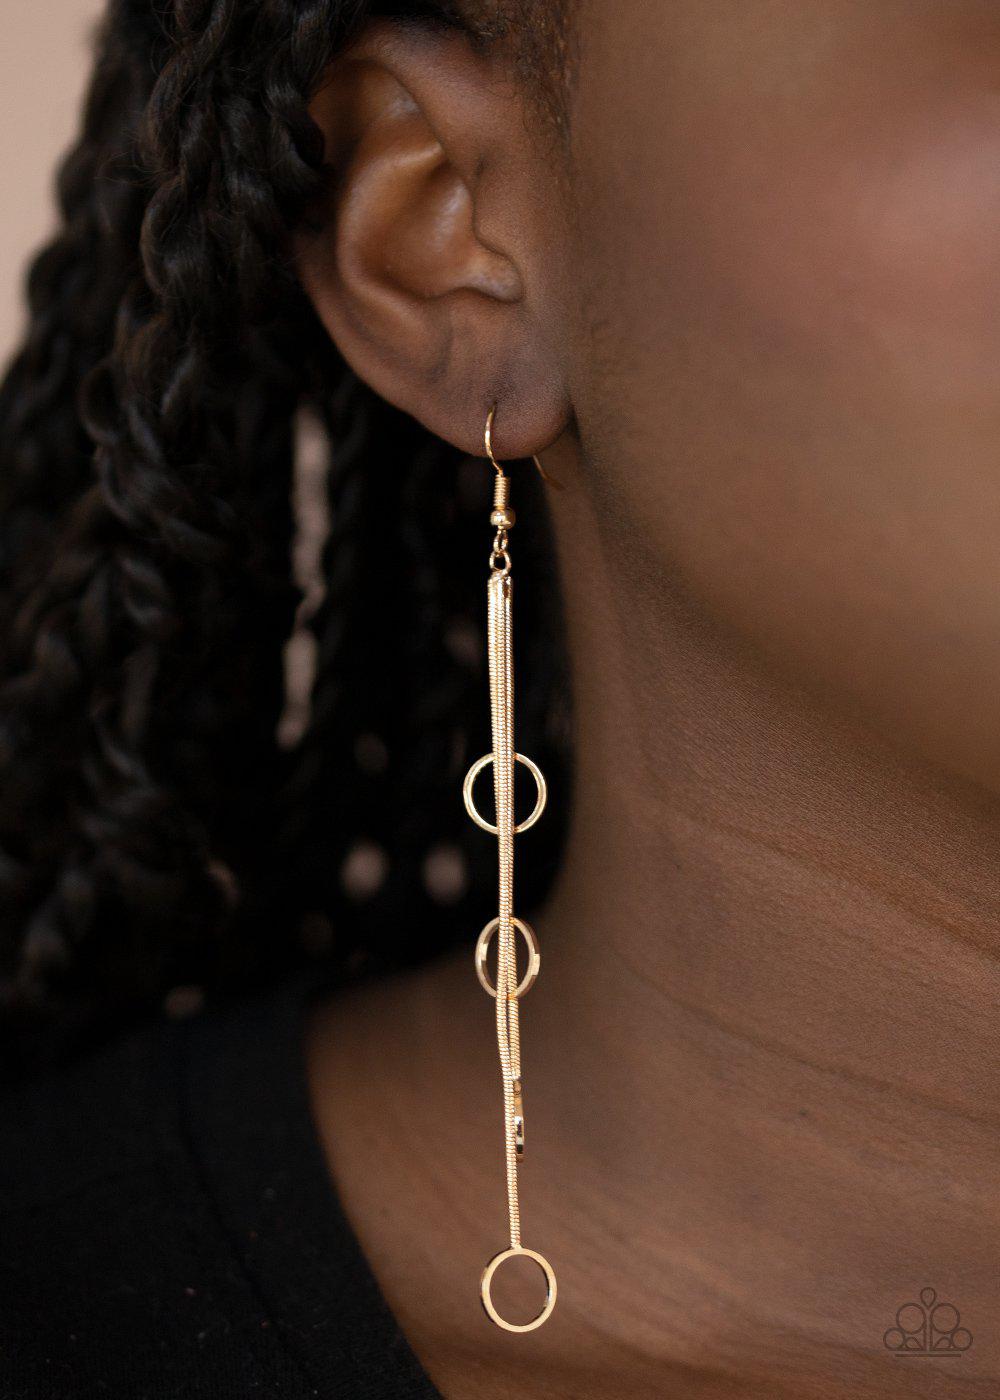 Full Swing Shimmer Gold Chain Earrings - Paparazzi Accessories-CarasShop.com - $5 Jewelry by Cara Jewels